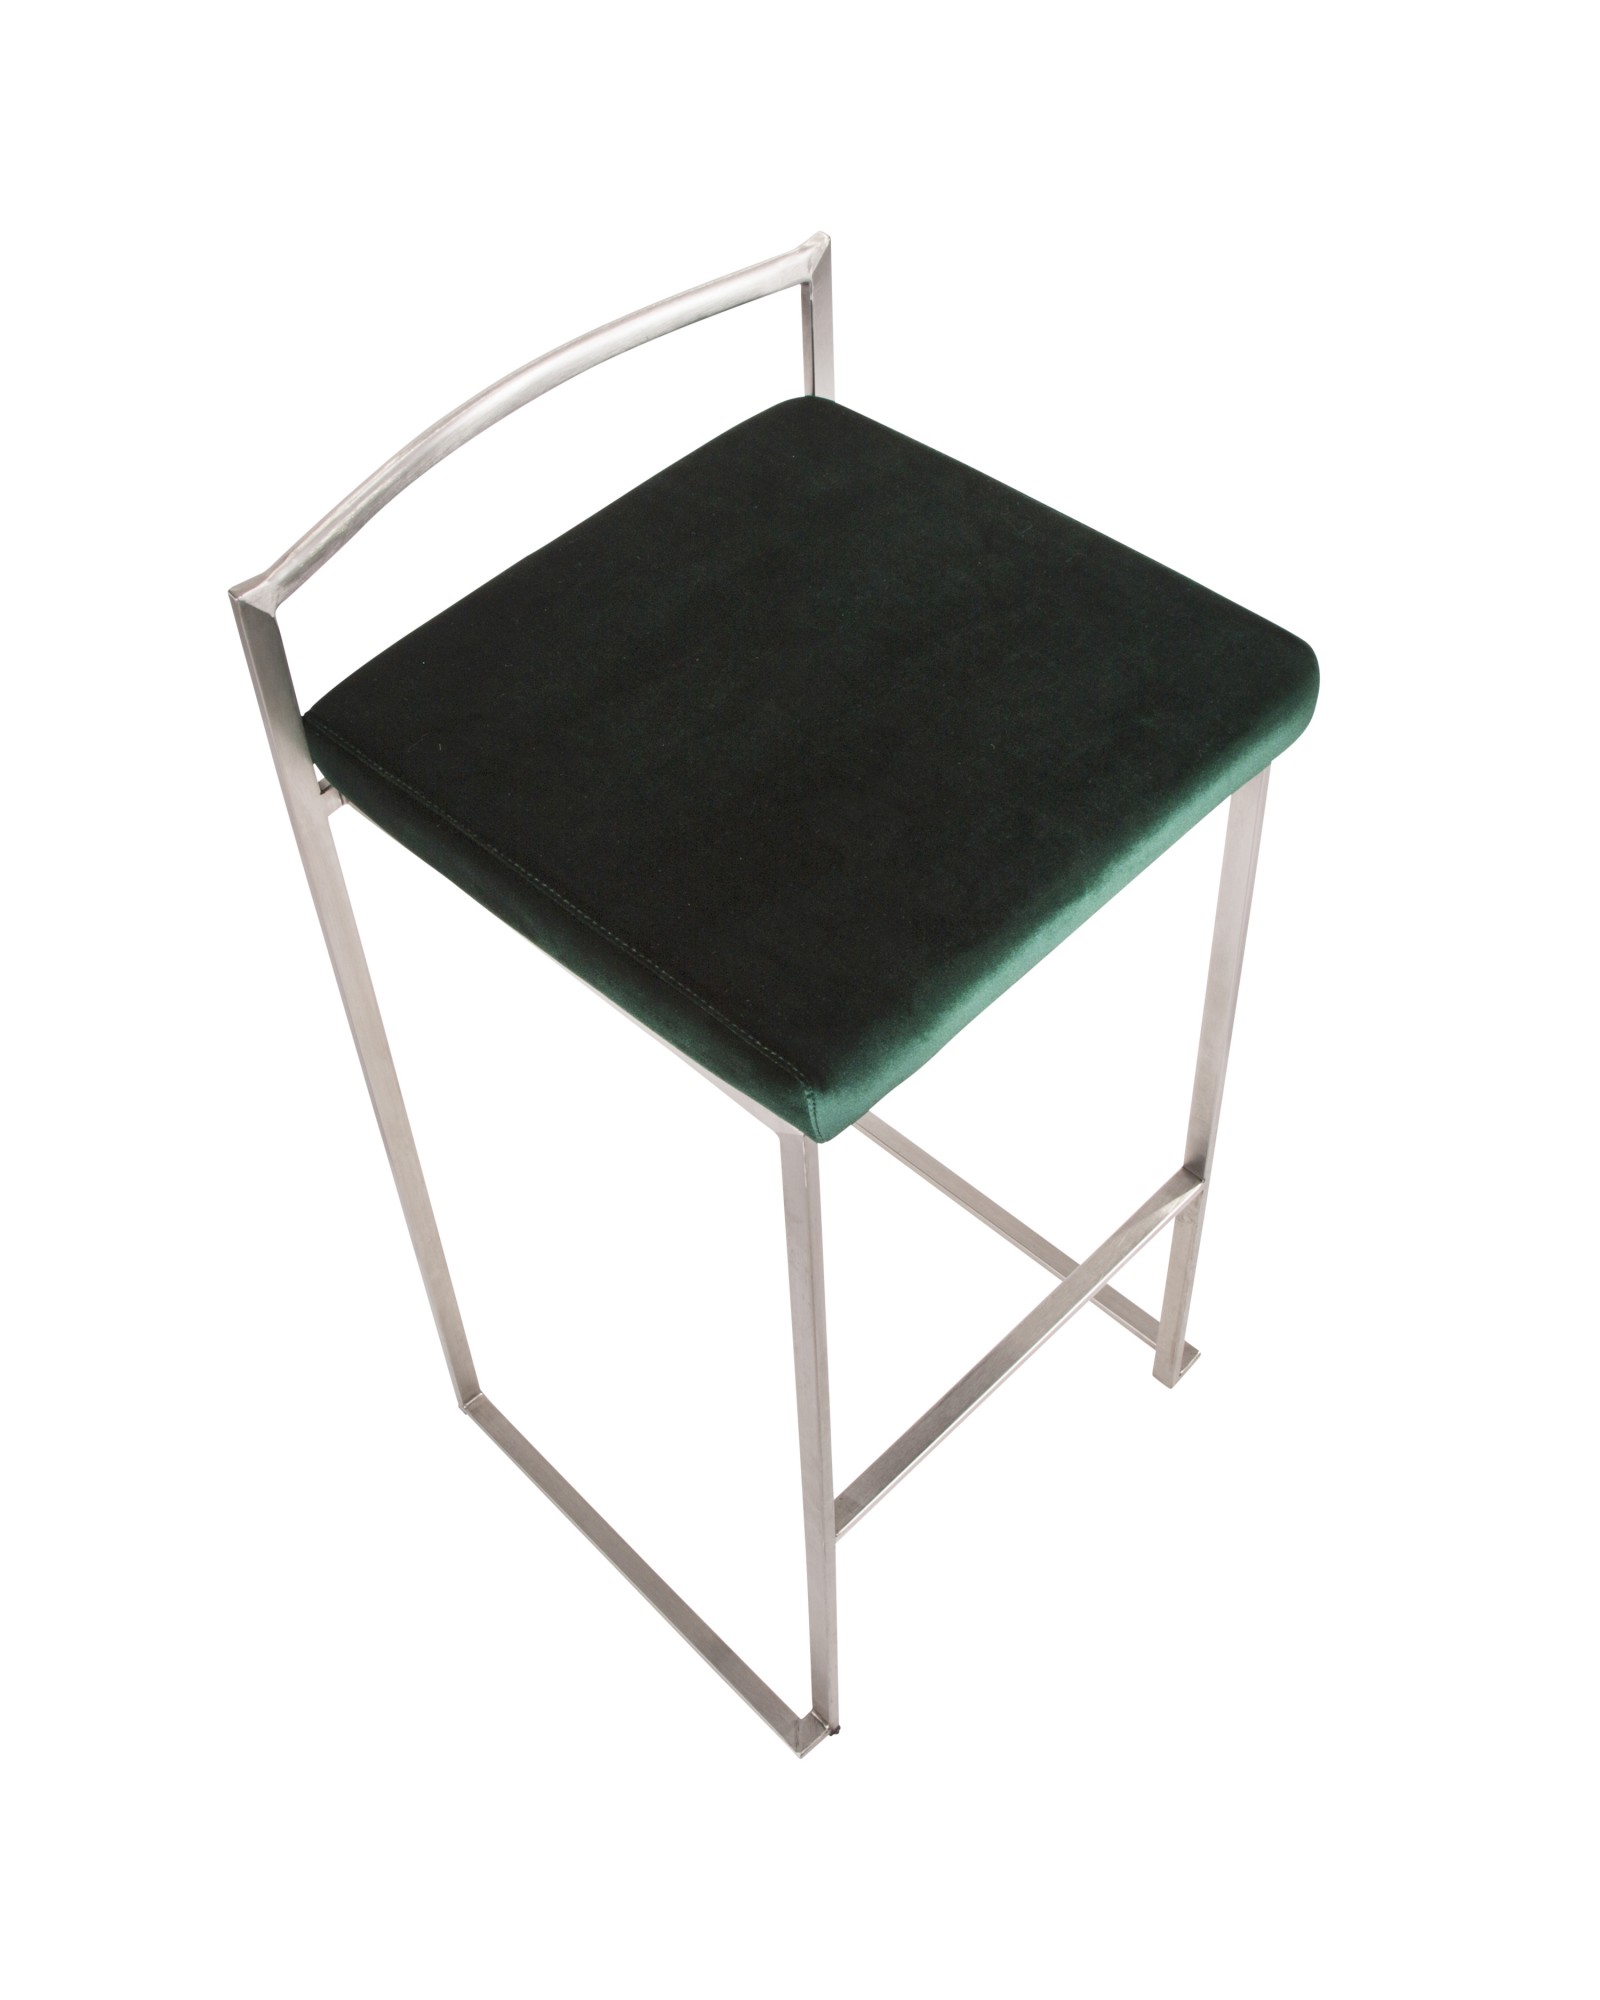 Fuji Contemporary Stackable Barstool in Stainless Steel with Green Velvet Cushion - Set of 2